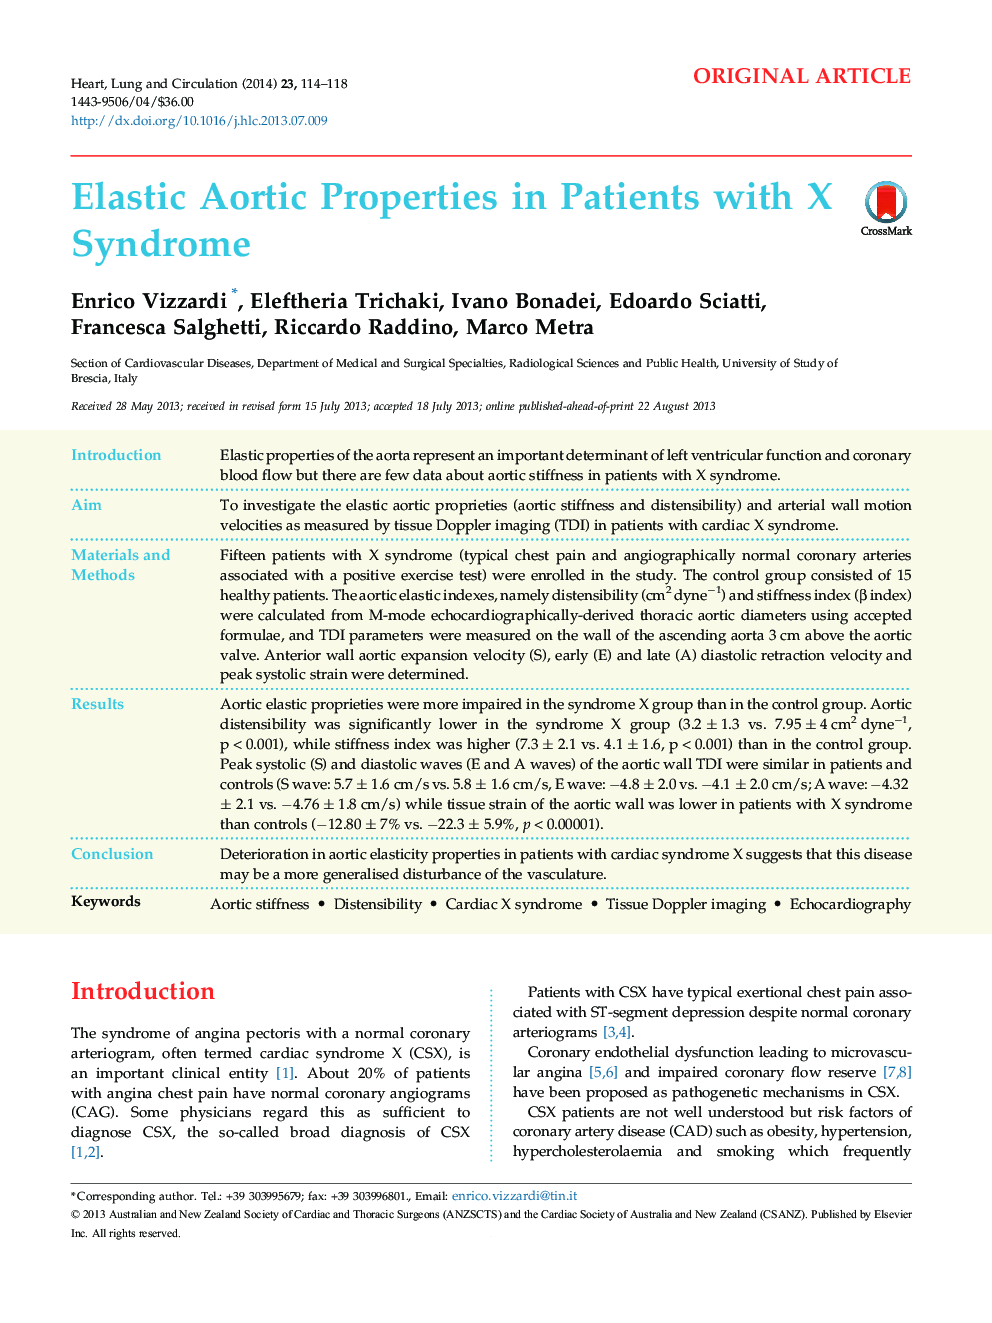 Elastic Aortic Properties in Patients with X Syndrome